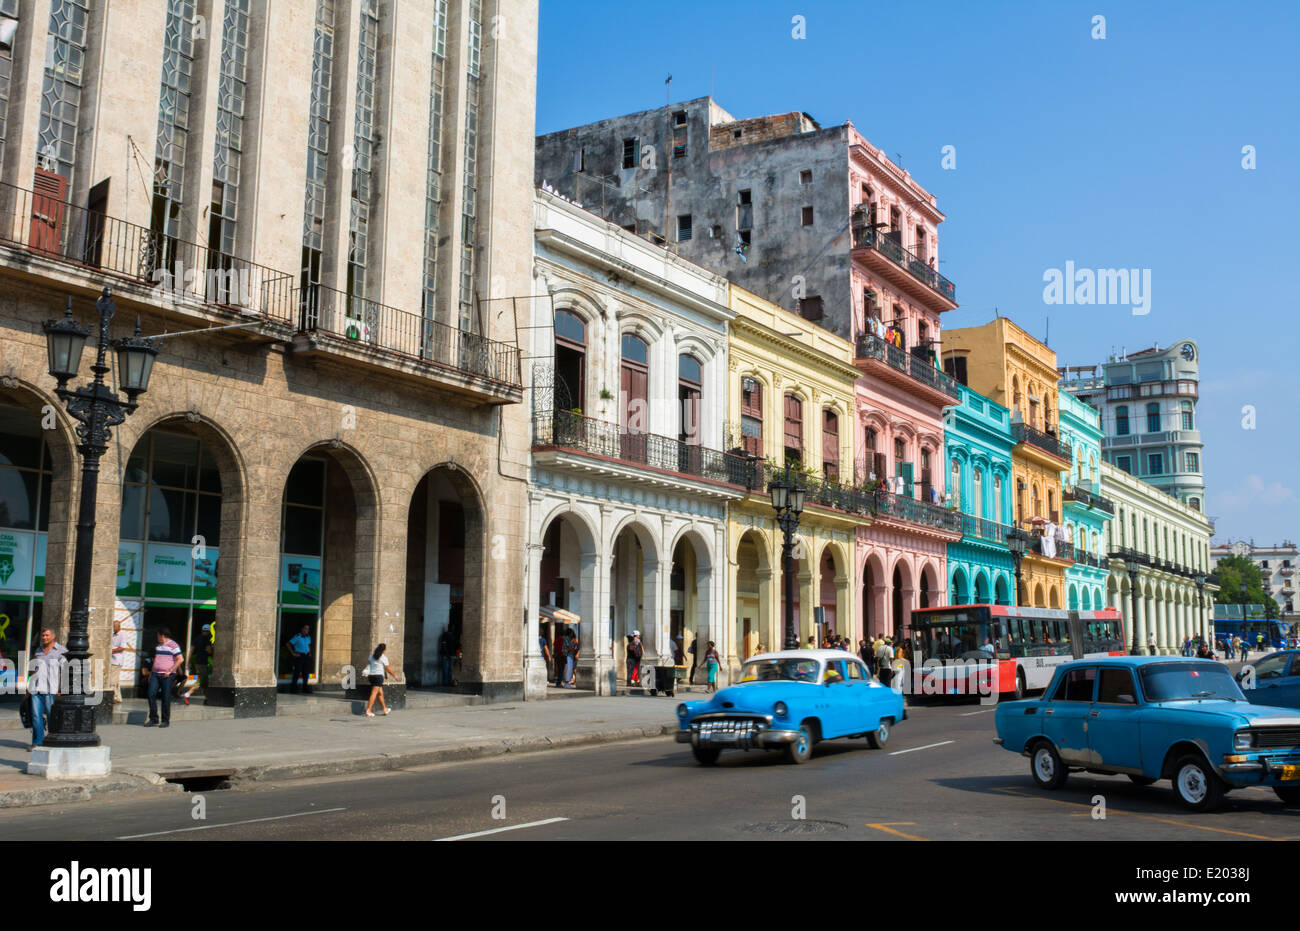 Havana Cuba old classic cars and taxis on street at Capital in downtown city of Habana with traffic and 1950s autos Stock Photo